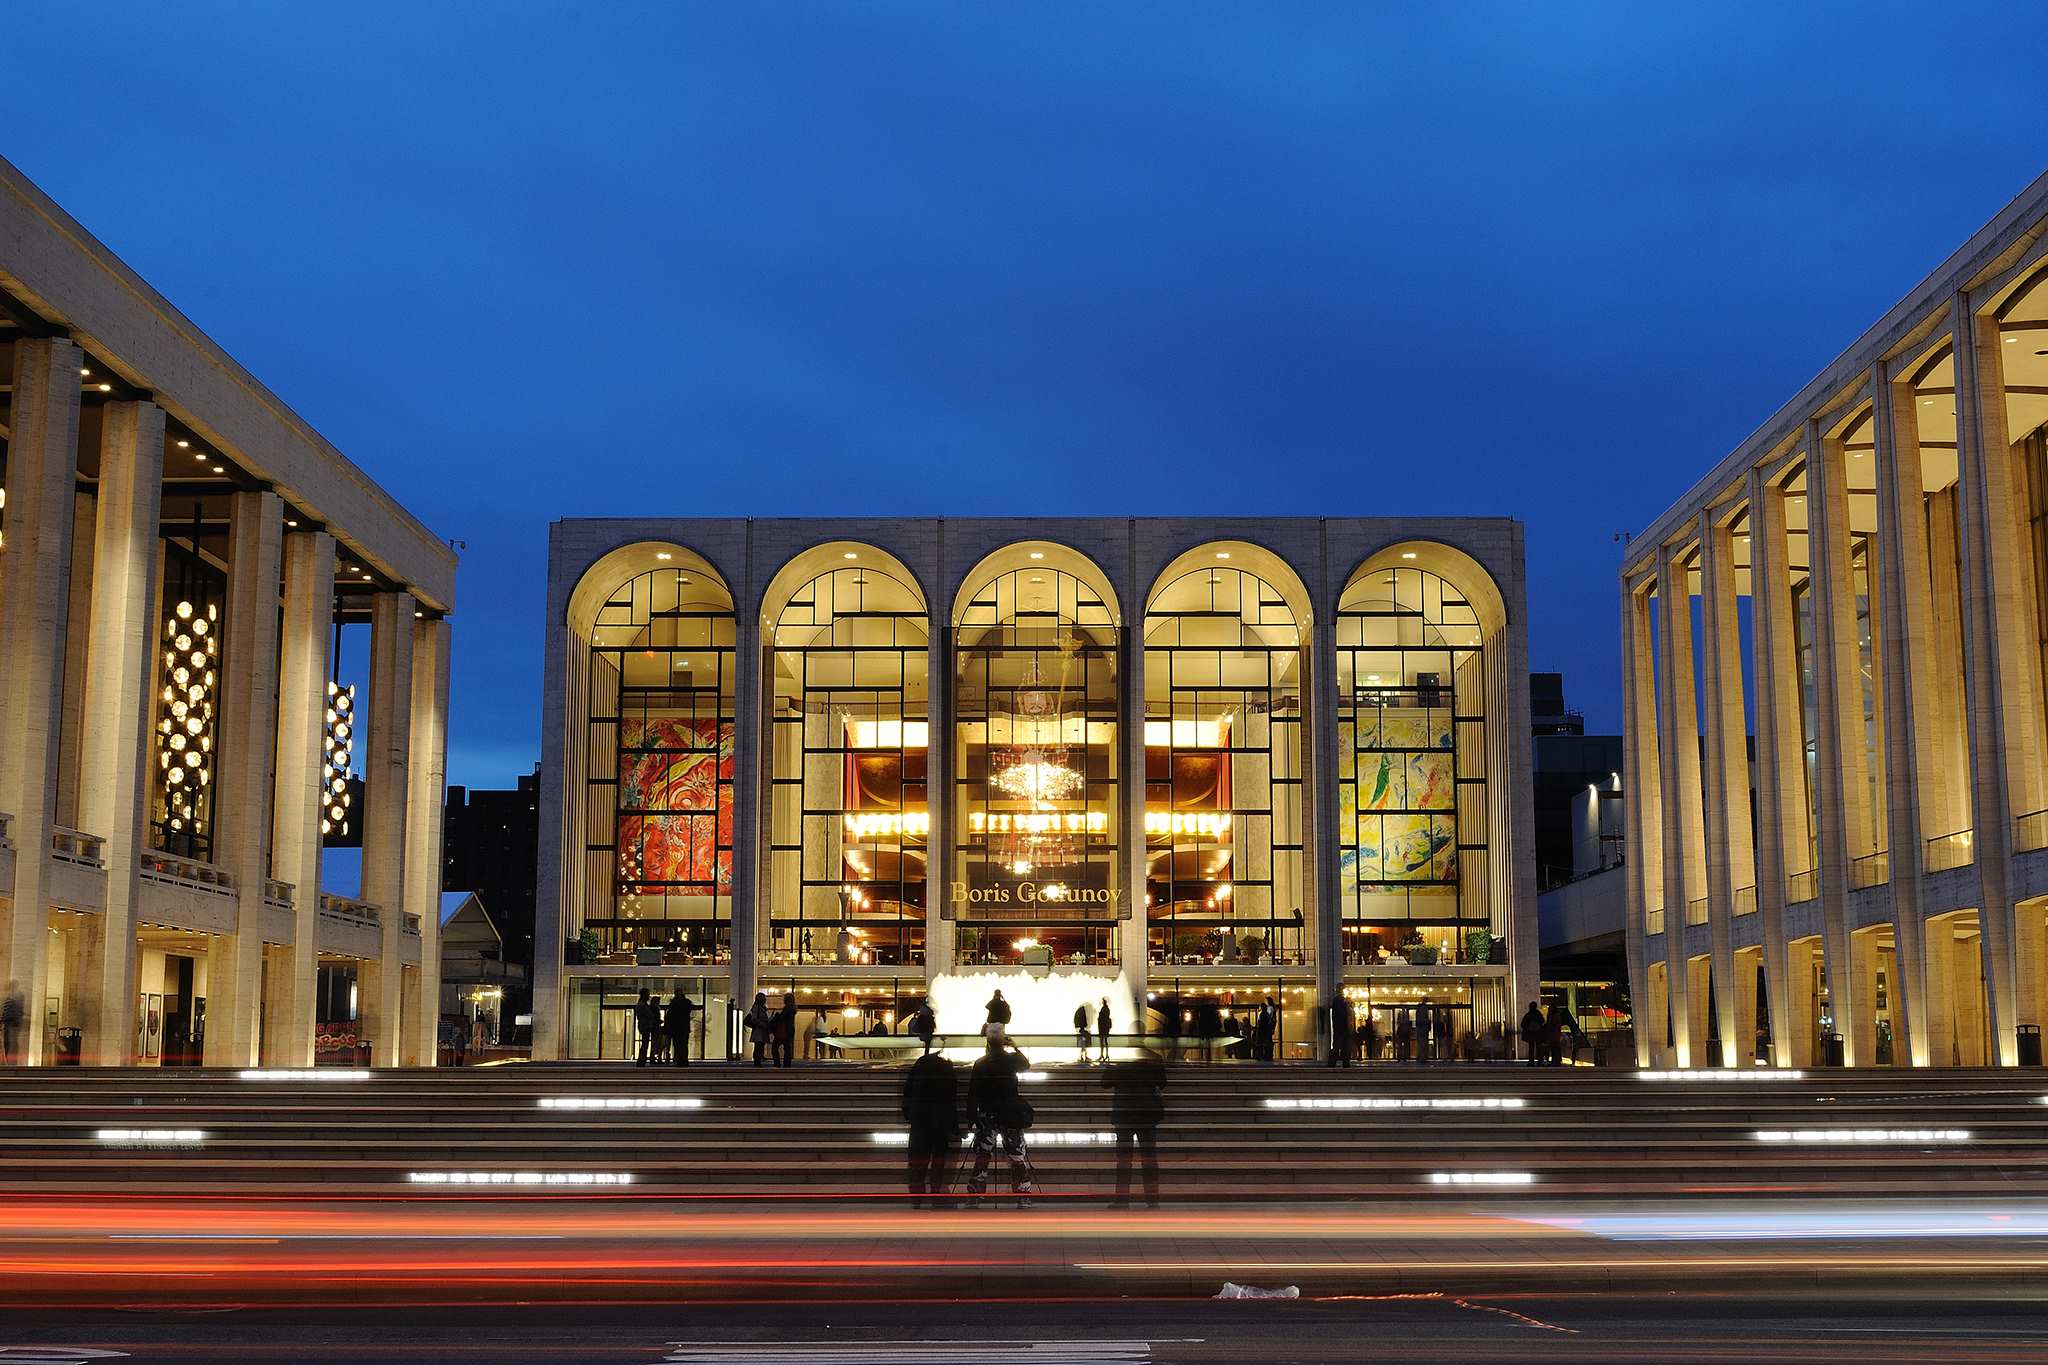 19-astounding-facts-about-lincoln-center-for-the-performing-arts